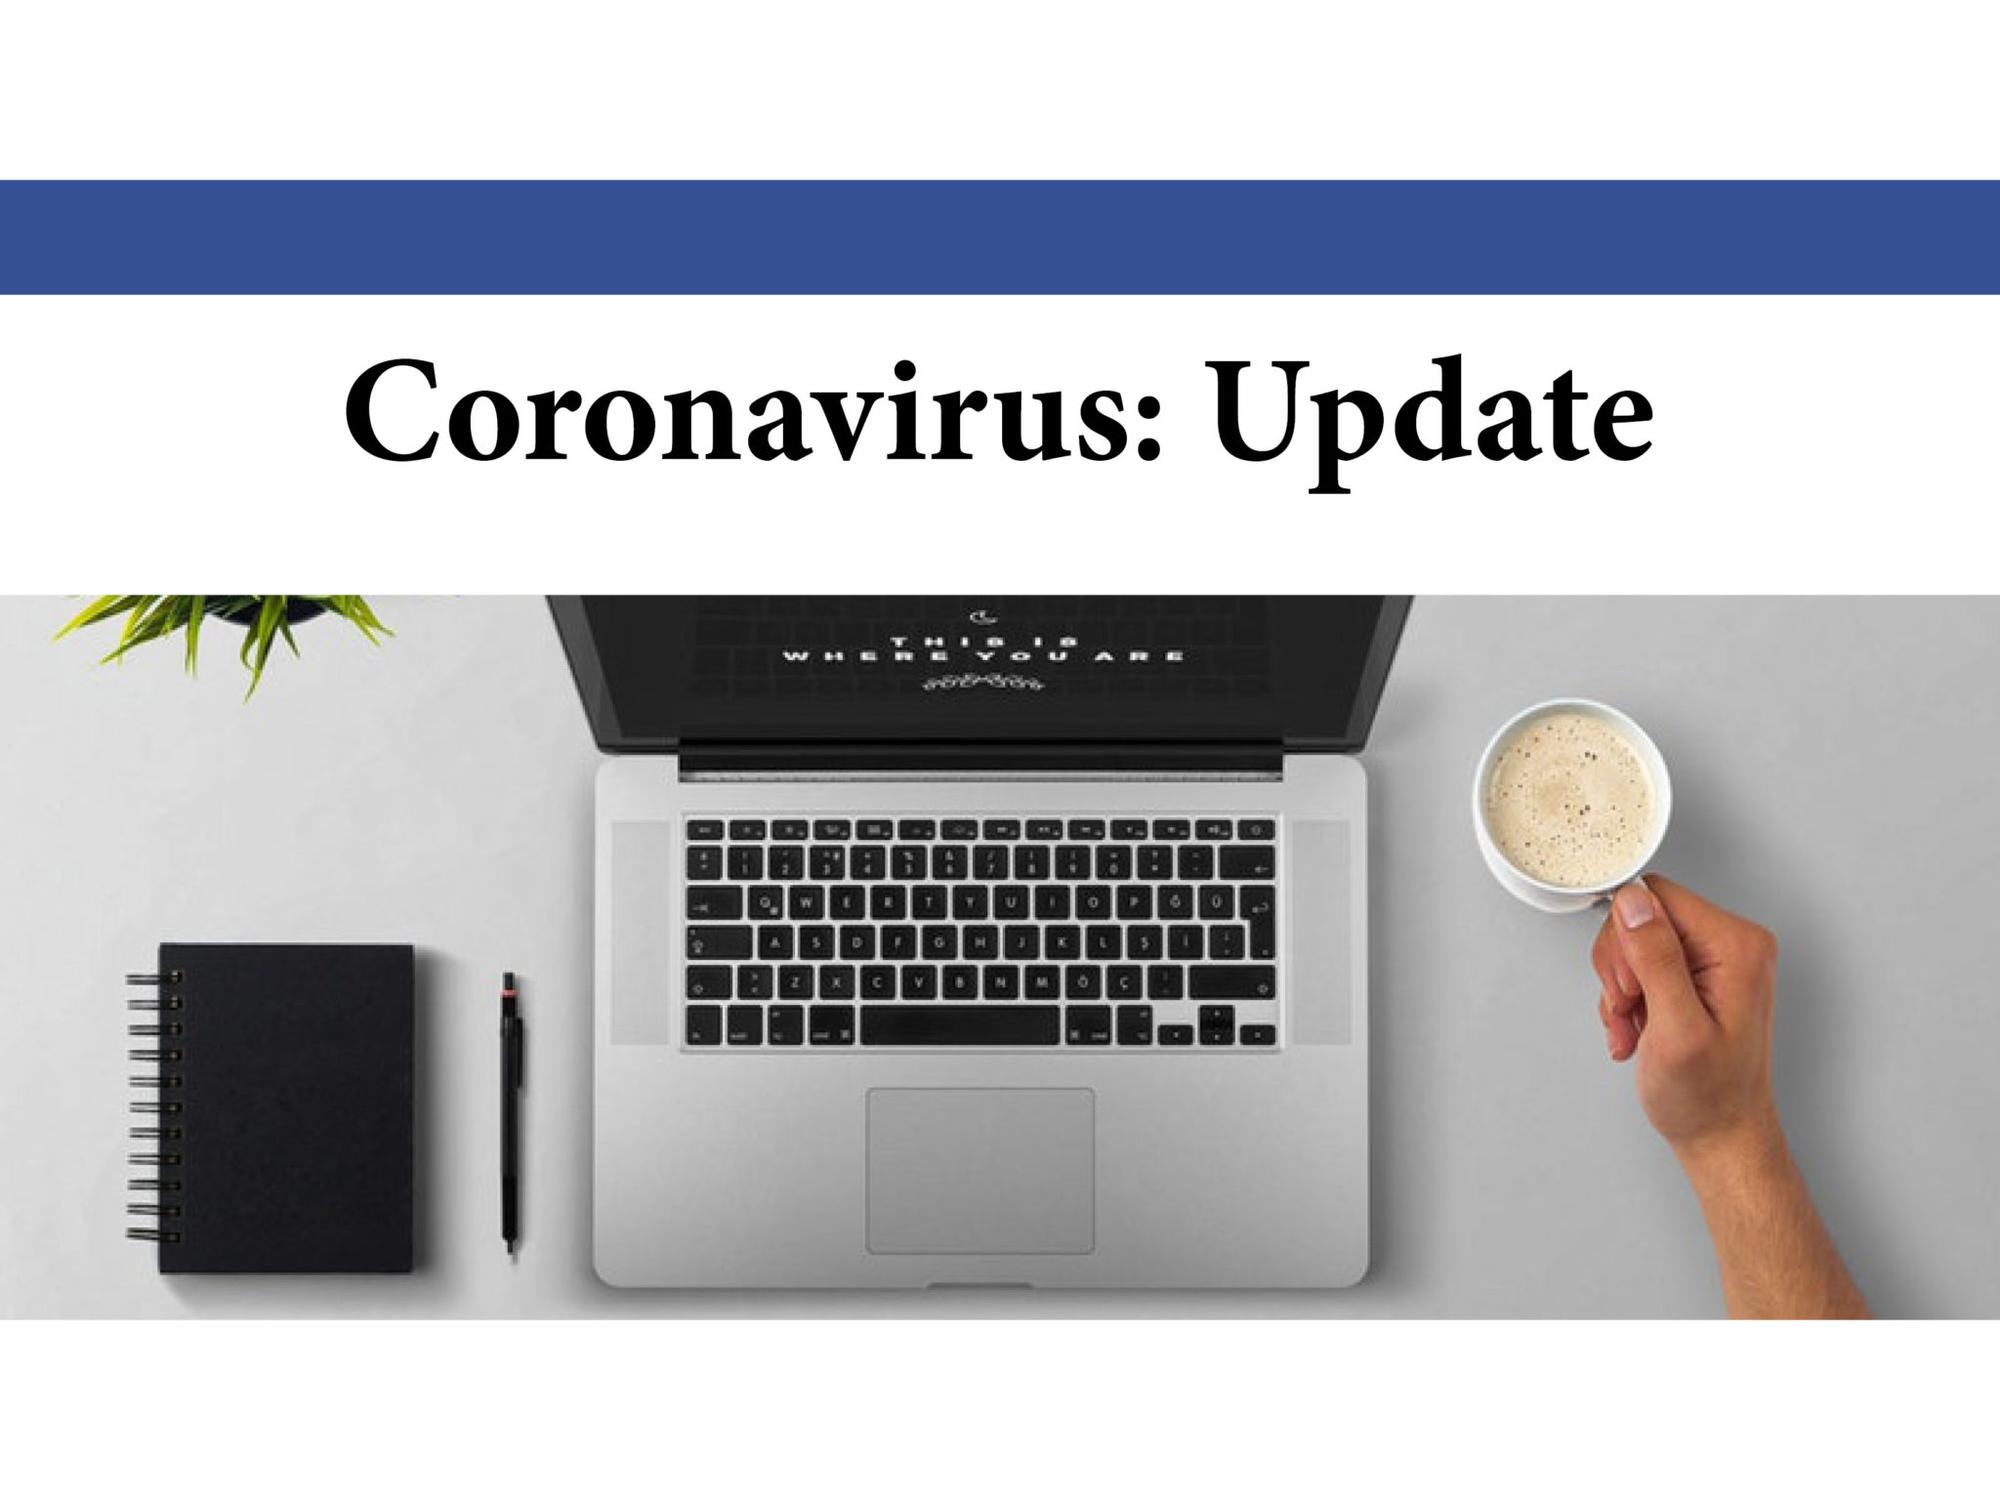 Ontario Ombudsman responding to hundreds of complaints related to the COVID-19 coronavirus